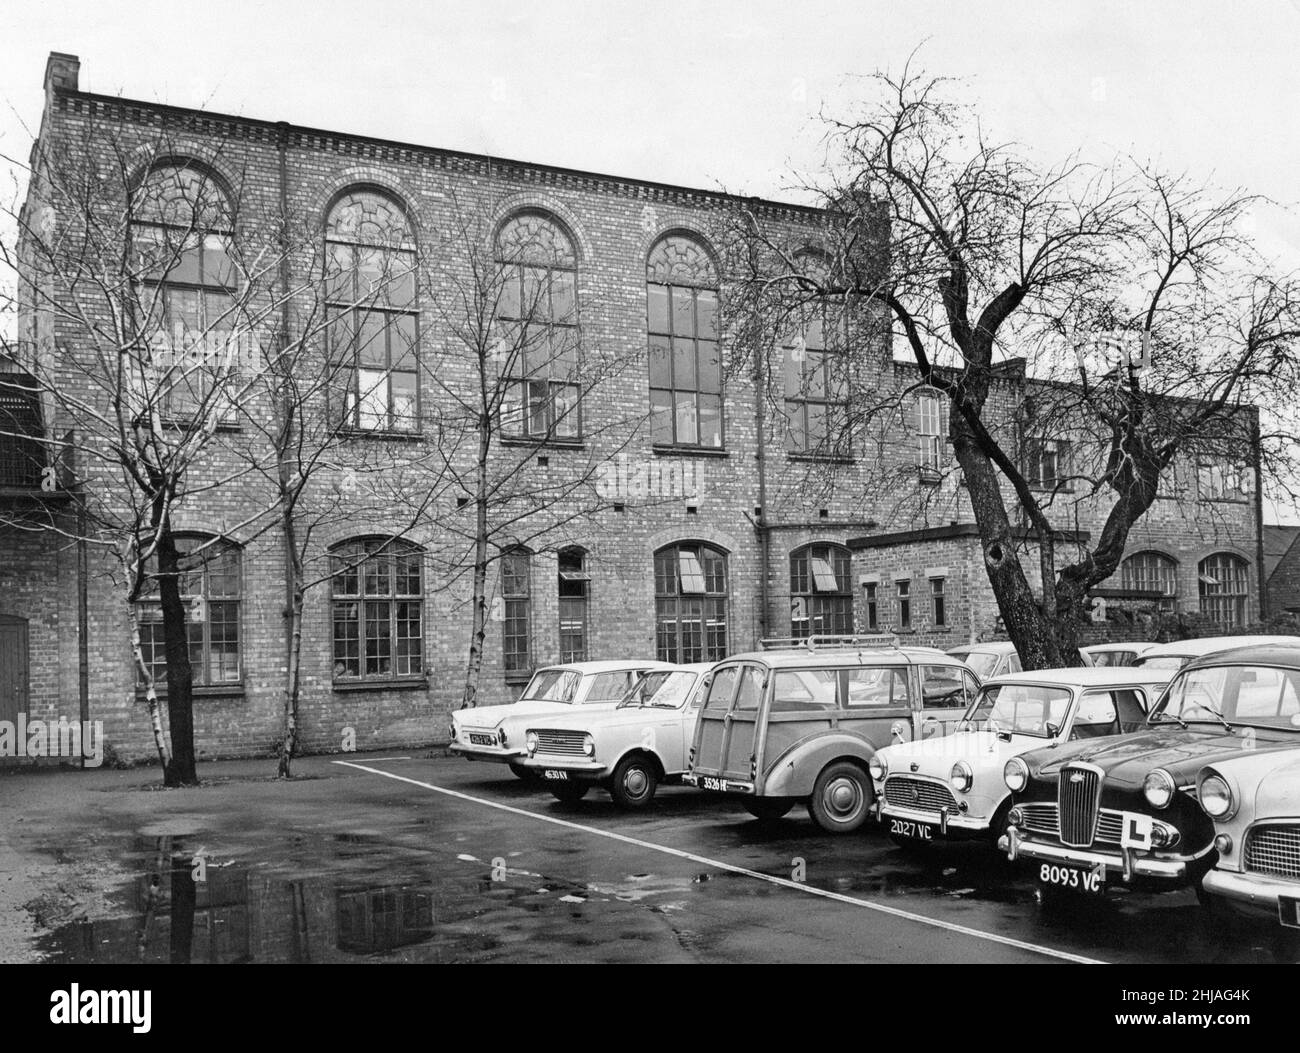 Coventry Technical College, in the Butts, Coventry, 21st February 1964. Additional Information:- Coventry Technical College was opened in 1935. The iconic classical style building cost just £183,000 to build. It became City College Coventry in 2002 and merged with Tile Hill College. Stock Photo